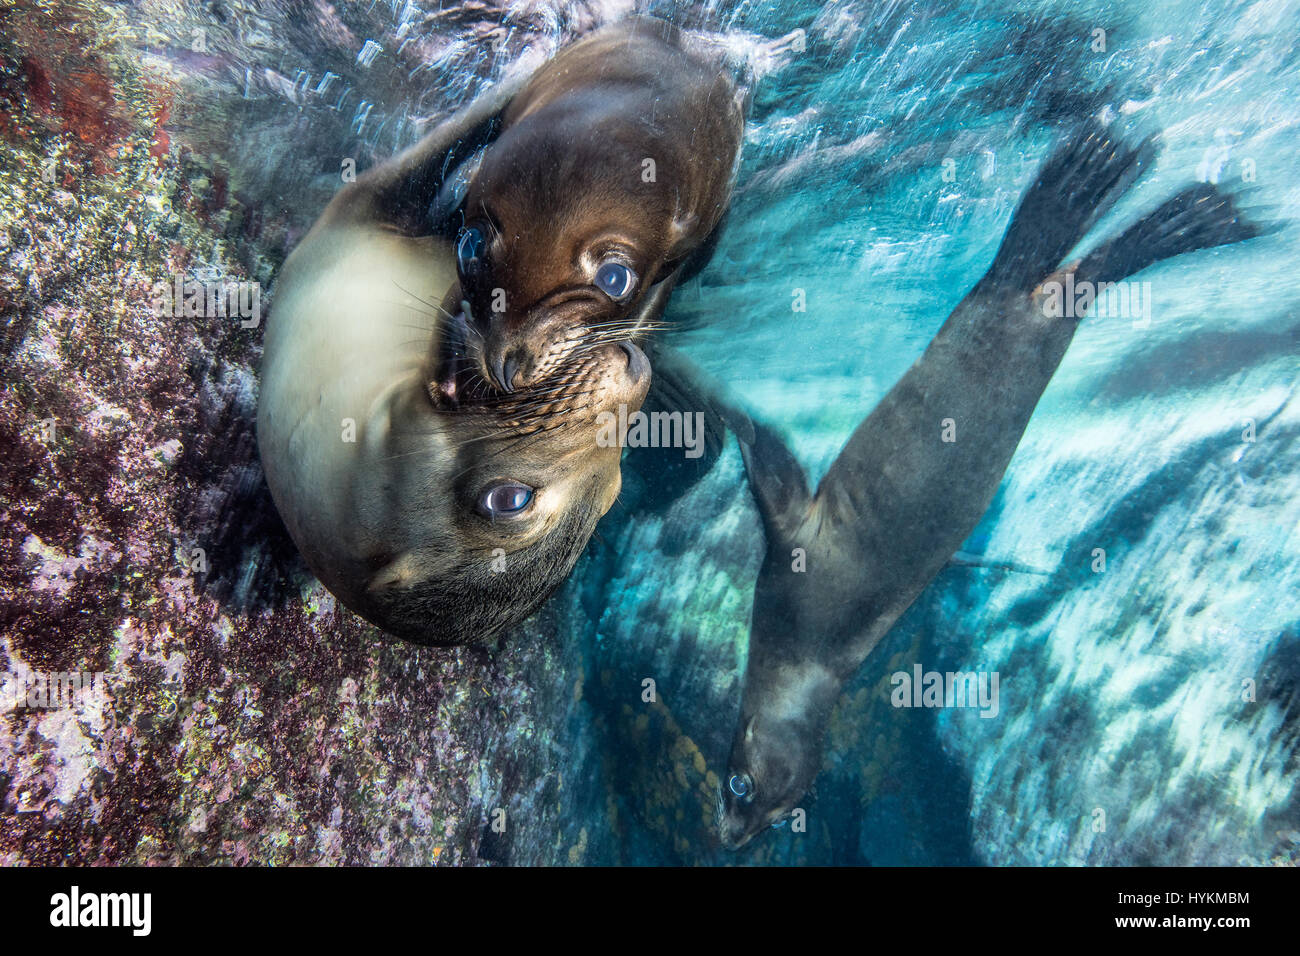 SNOGGING sea lions have been captured indulging in a full mouthed kiss that would put the most amorous teenage couple to shame. Other side-splitting pictures show the fun-loving sea lions playing tag and underwater wrestling with local photographer Mario Chow off the coast of Mexico. The curious sea mammals wasted no time in checking out his camera and finding out exactly what it was, with one getting a close up selfie and photobomb before then trying out an inquisitive bite on the £2,000 gadget. Stock Photo